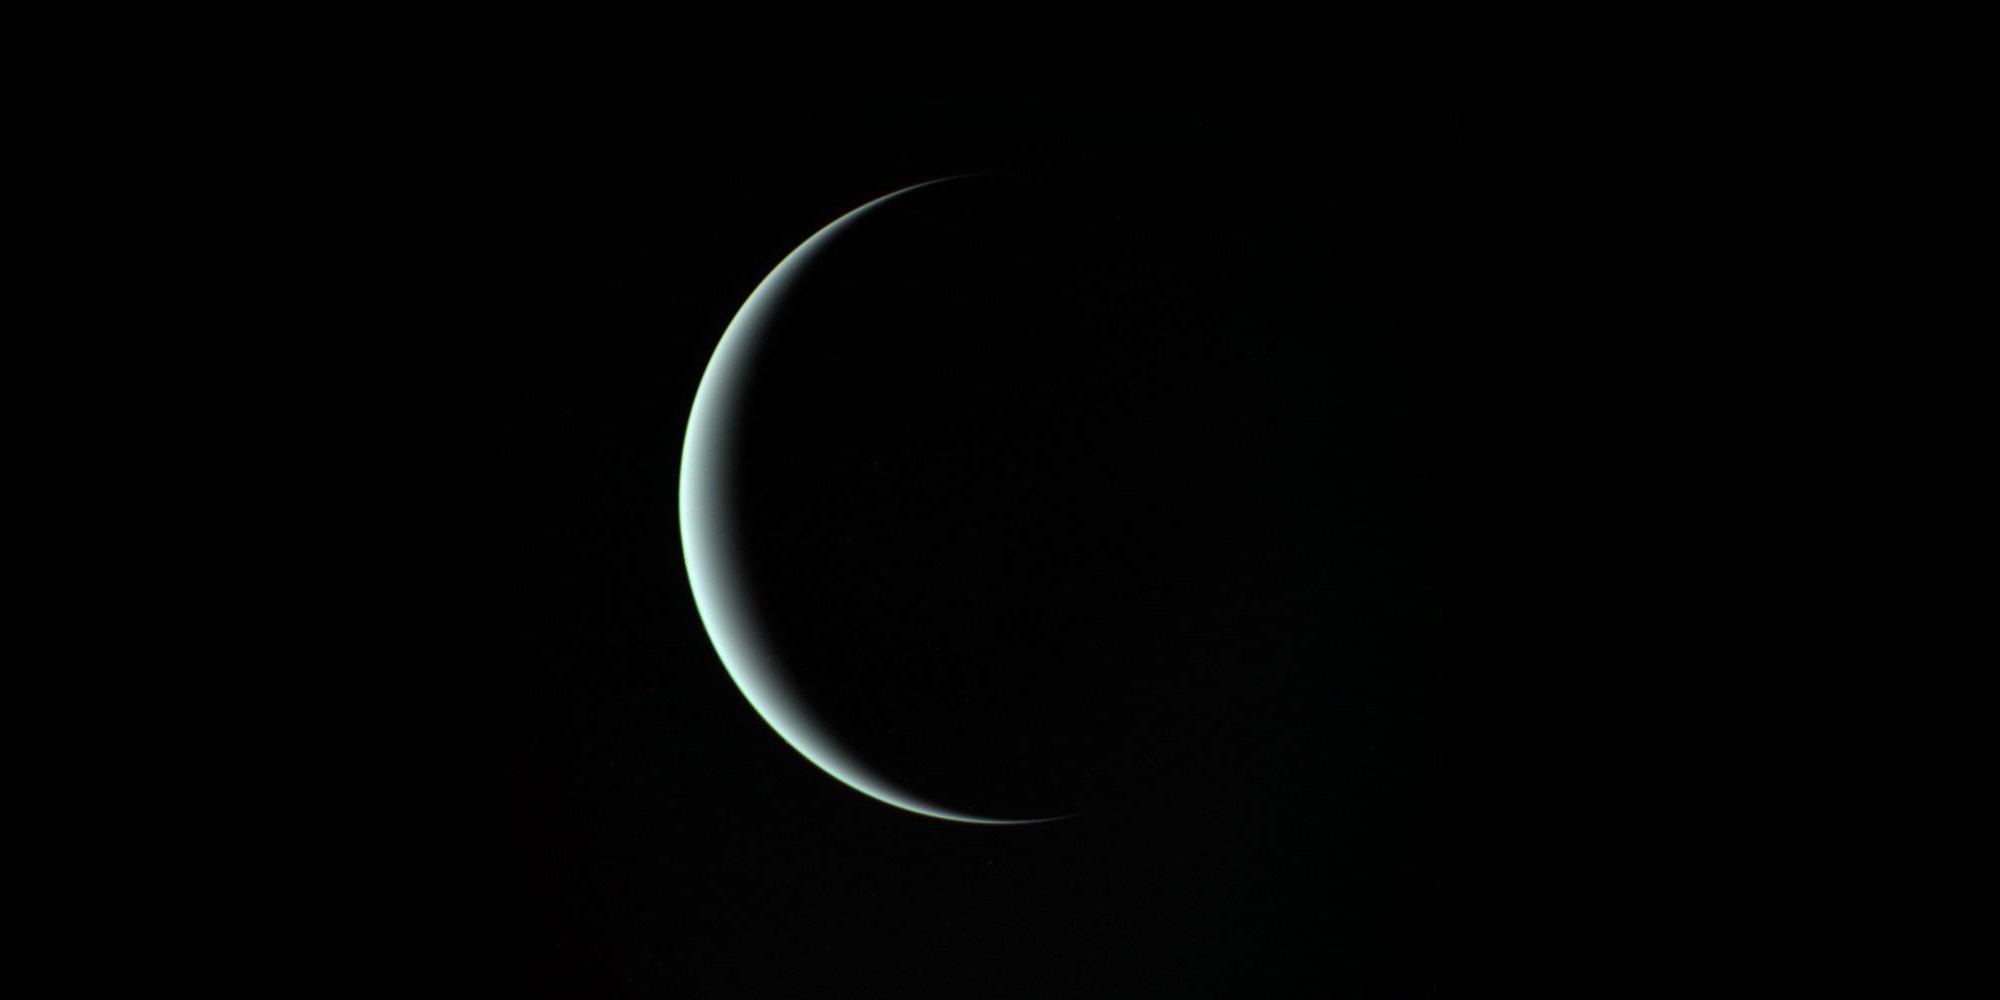 A crescent Uranus — a view we can’t get from Earth — seen by the Voyager 2 probe as it passed the planet in 1986. Credit: NASA/JPL